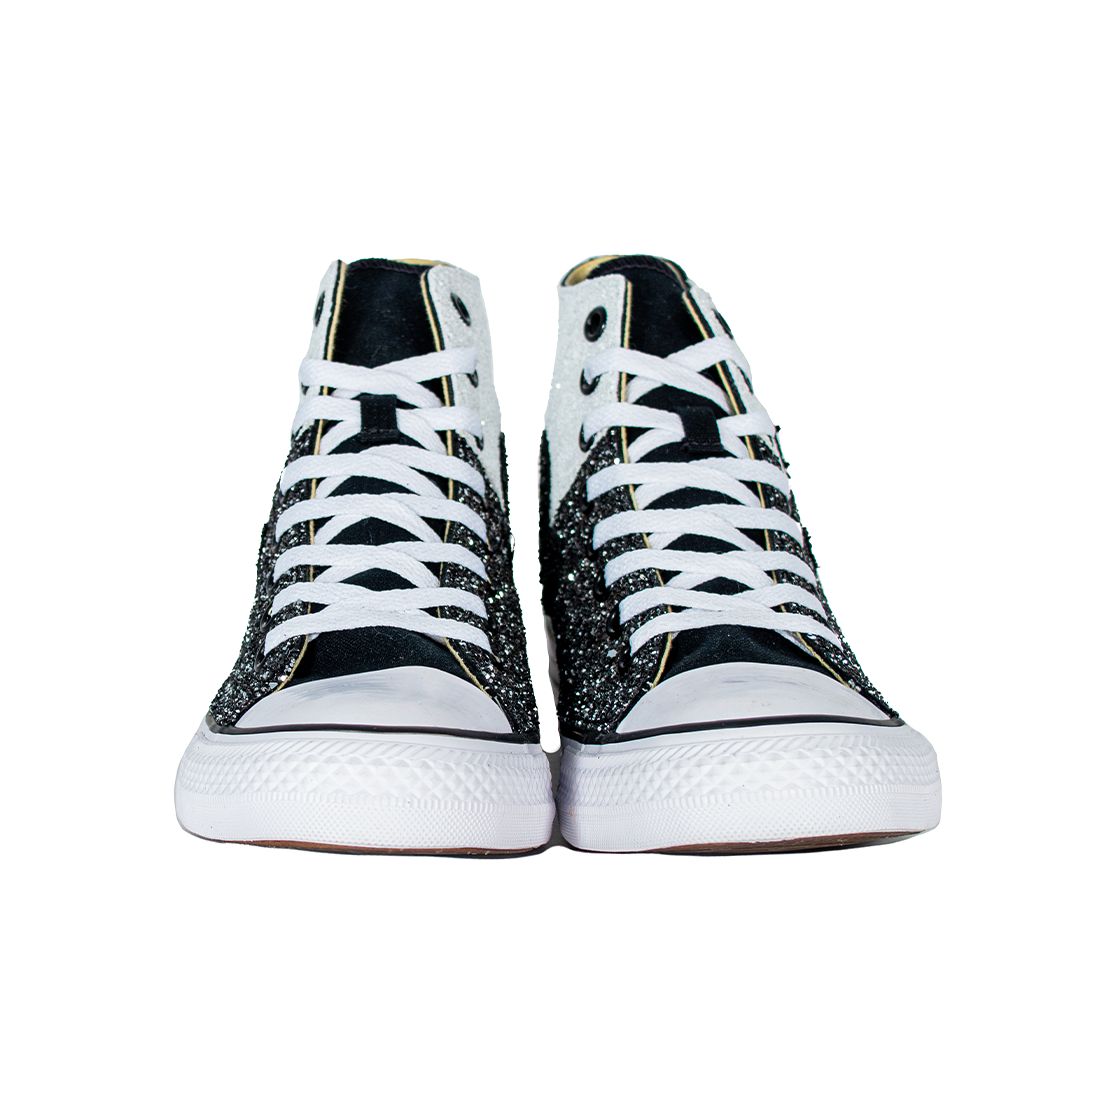 CONVERSE PERSONALIZZATE NERA BUTTERFLY